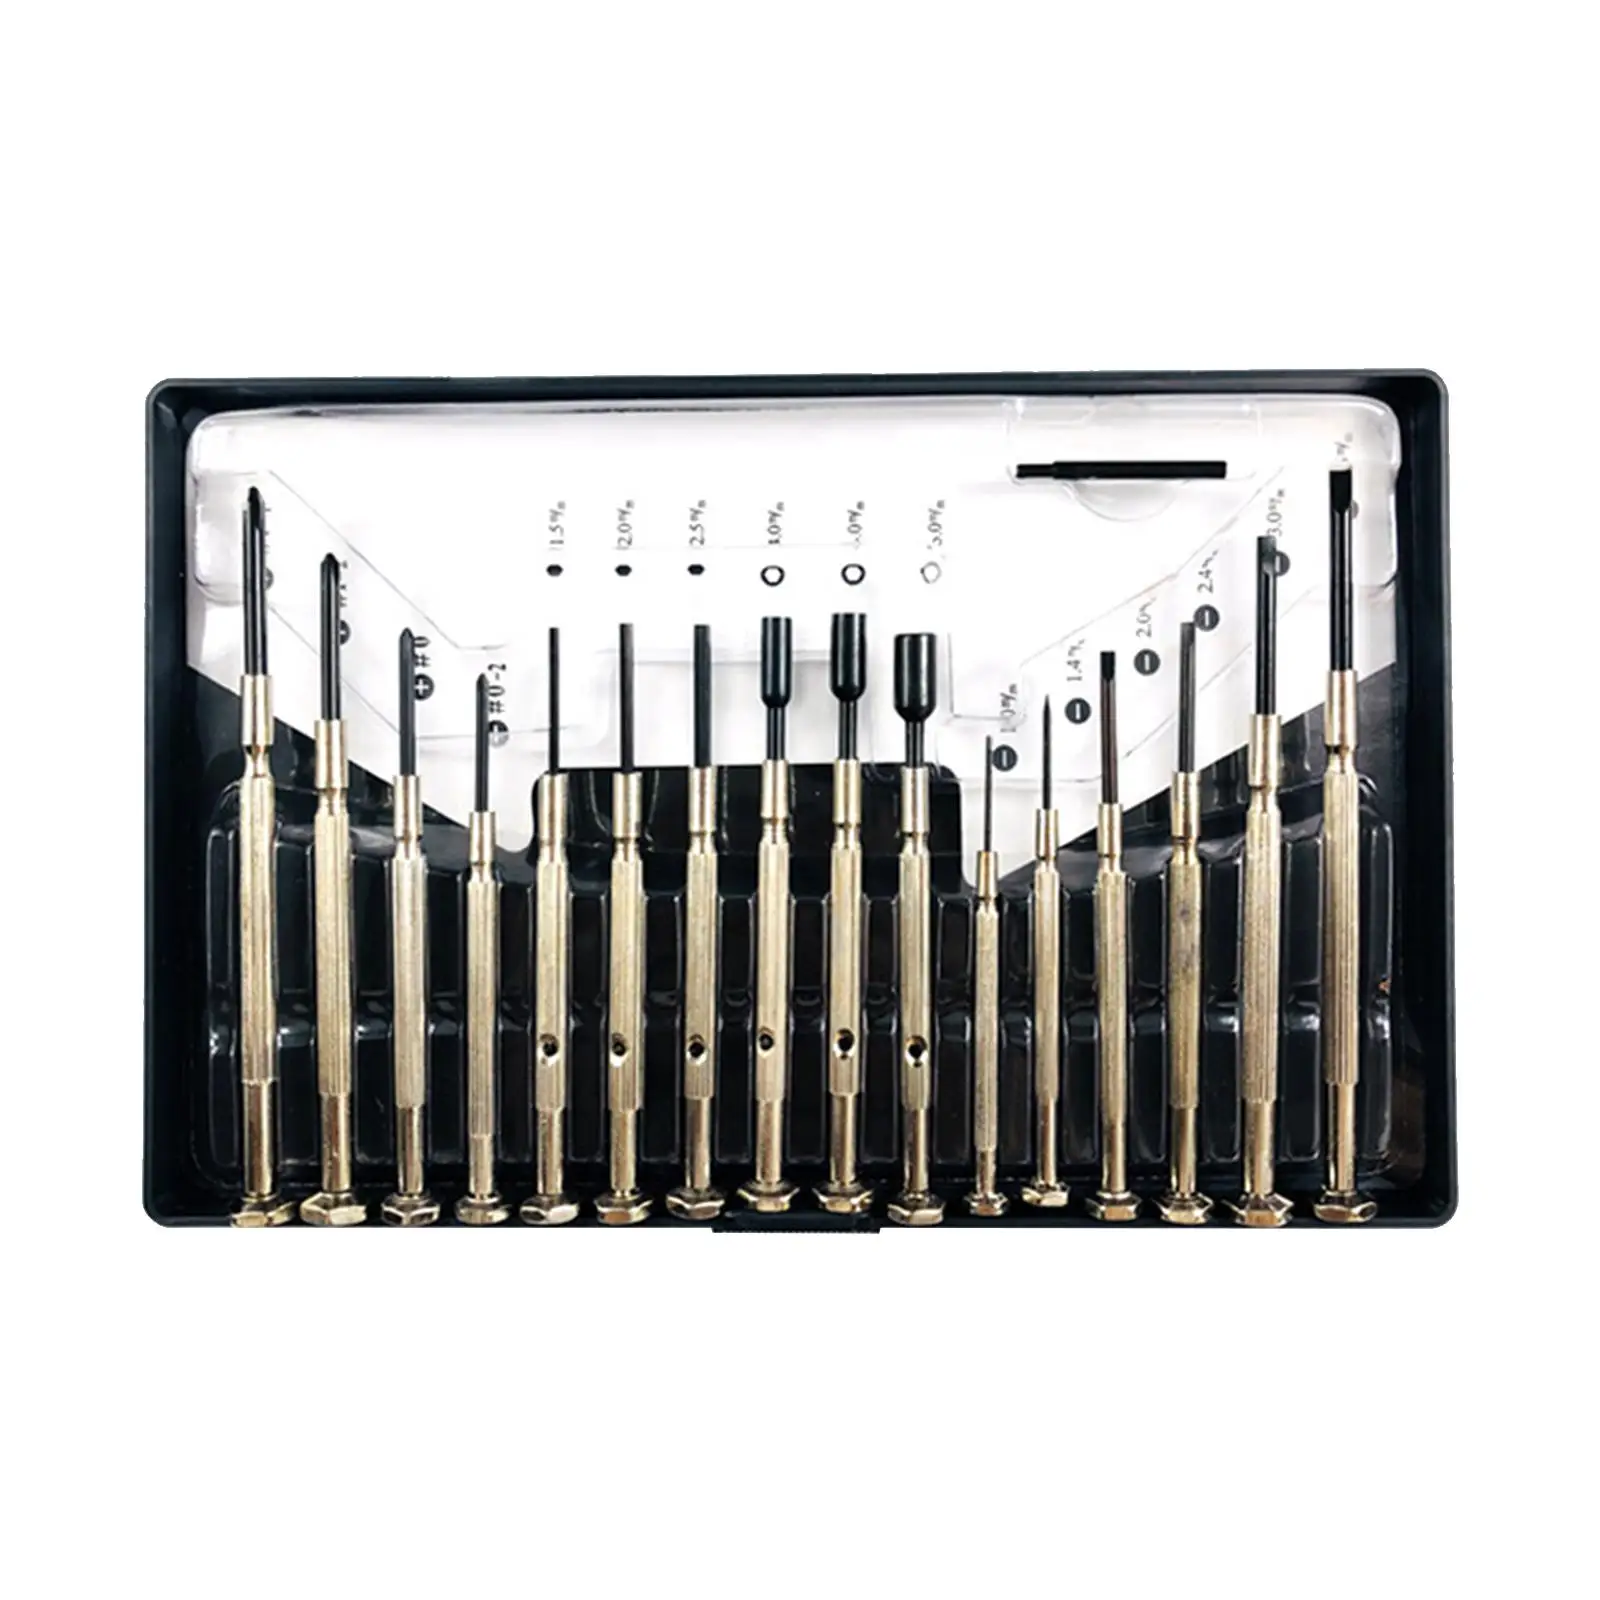 

16Pcs Precision Screwdriver Set Hand Tools Maintenance Tool Watch Screwdriver for Computer Game Console PC Glasses Tablet